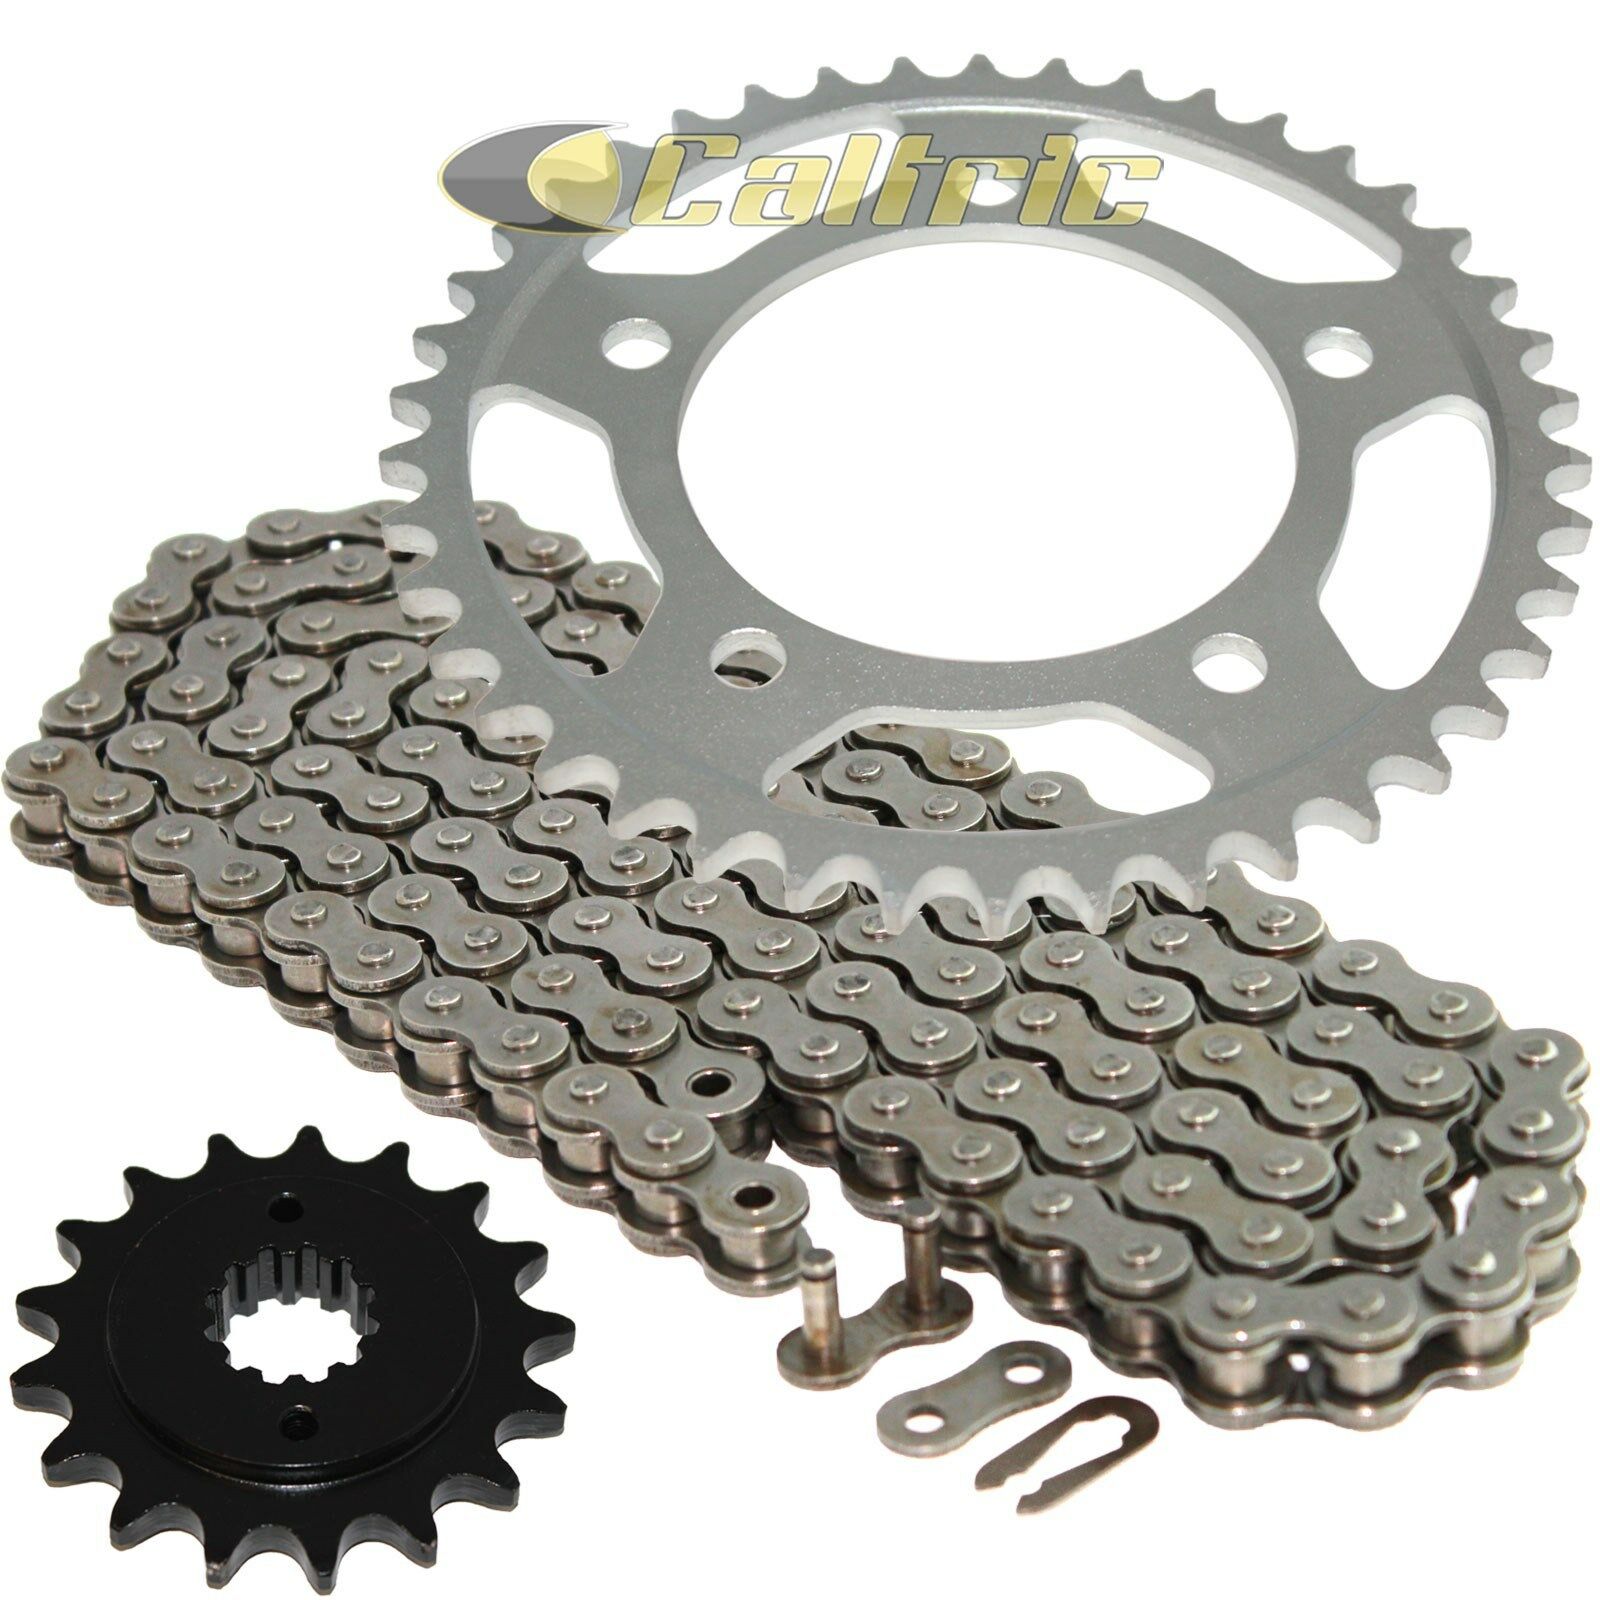 Drive Chain & Sprockets Kit For Honda Vt750c Vt750cd Shadow Acedeluxe 1998-04